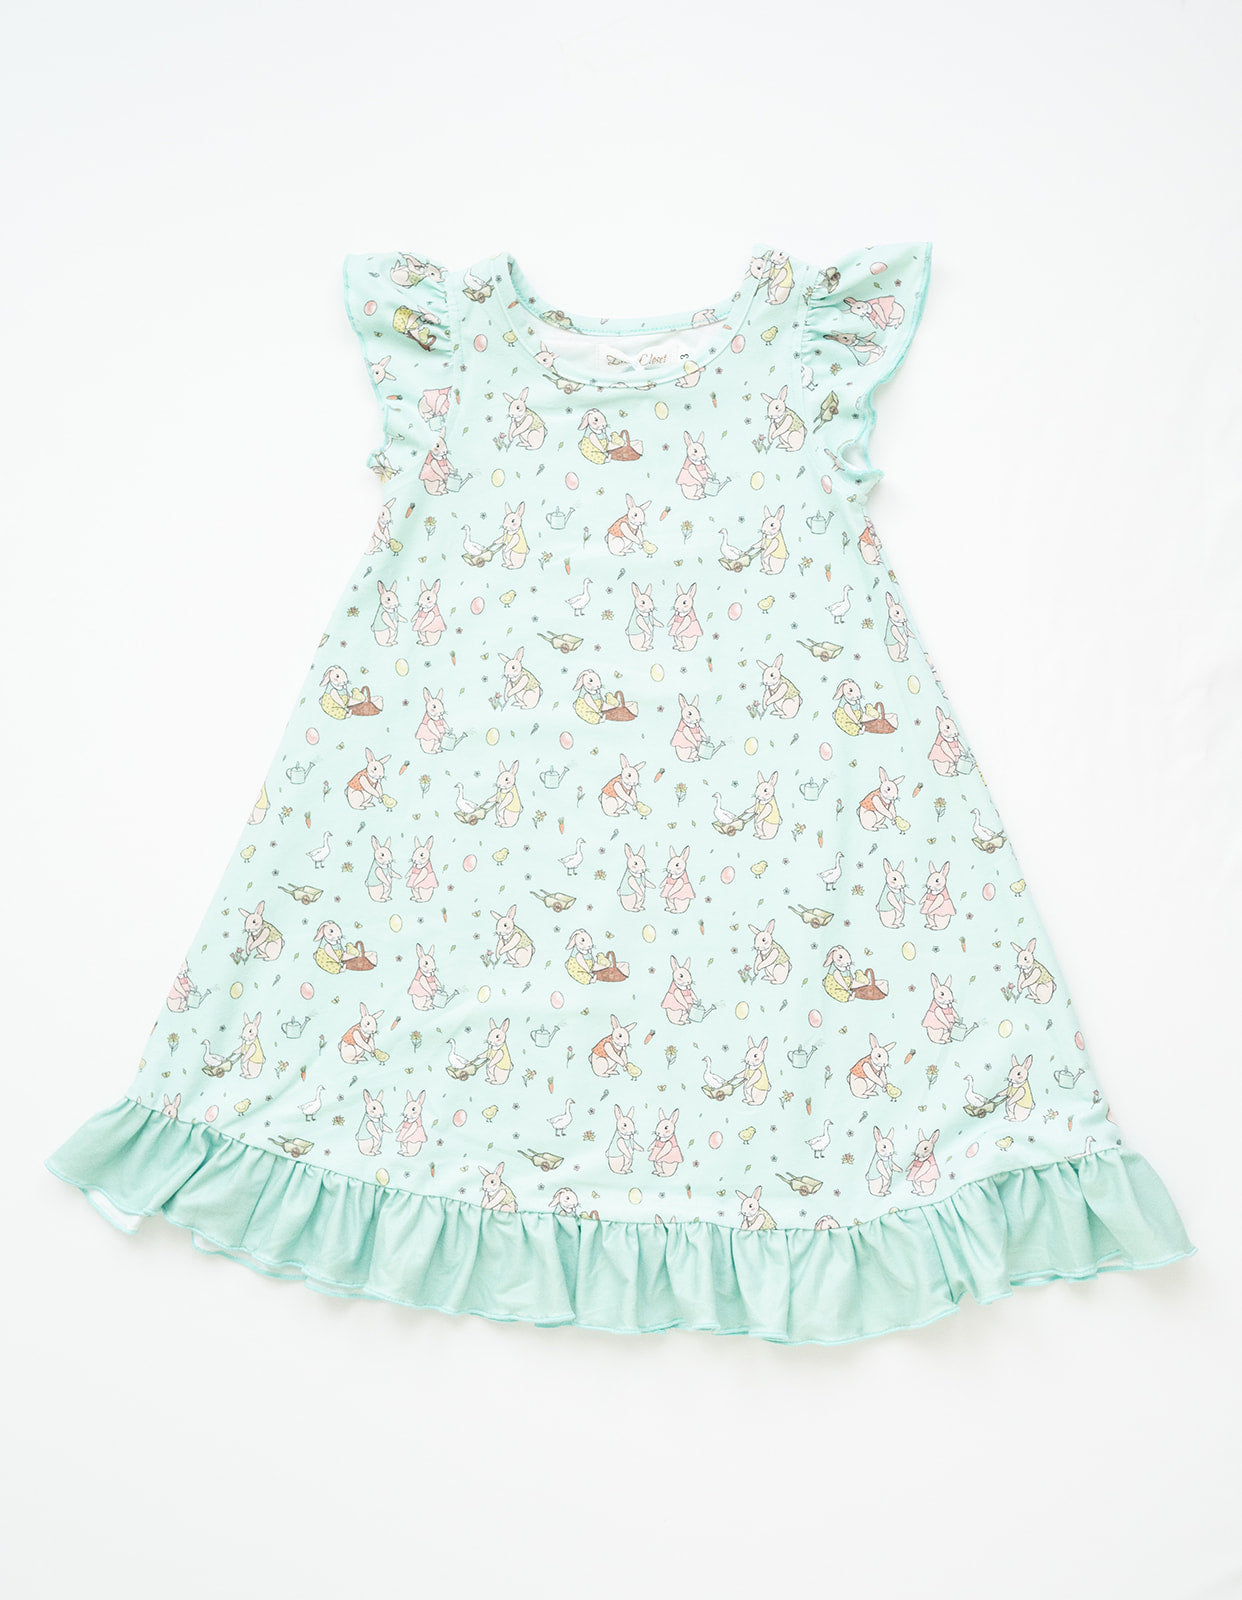 Eggtastic Bunny Buddies Mint Printed Lounge Around Town Gown